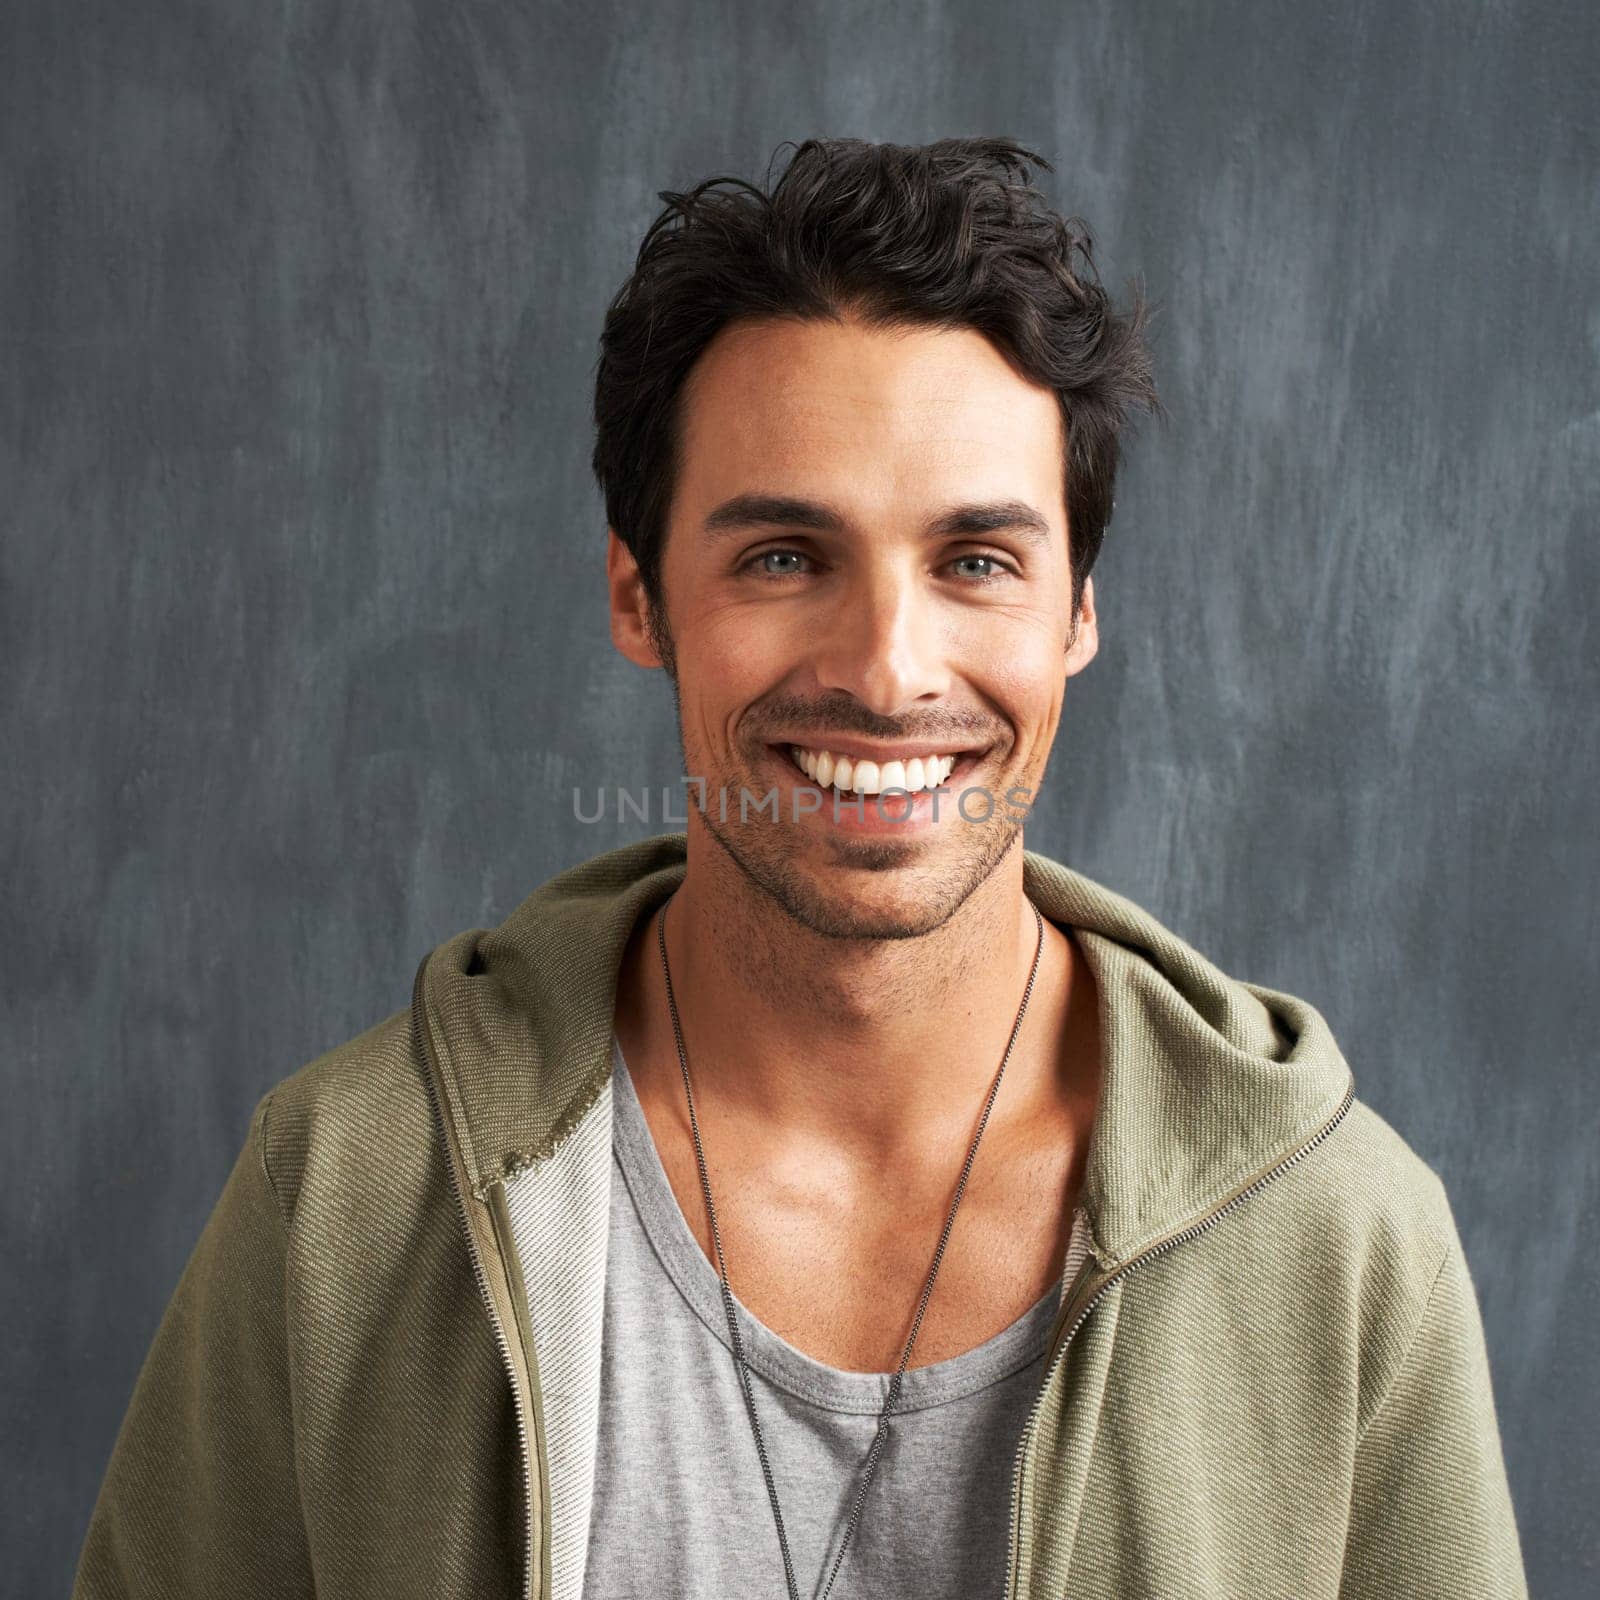 Fashion, happy and portrait of man on gray background with trendy style, clothes and casual outfit. Smile, handsome and face of person on texture wall with confidence, pride and positive attitude.